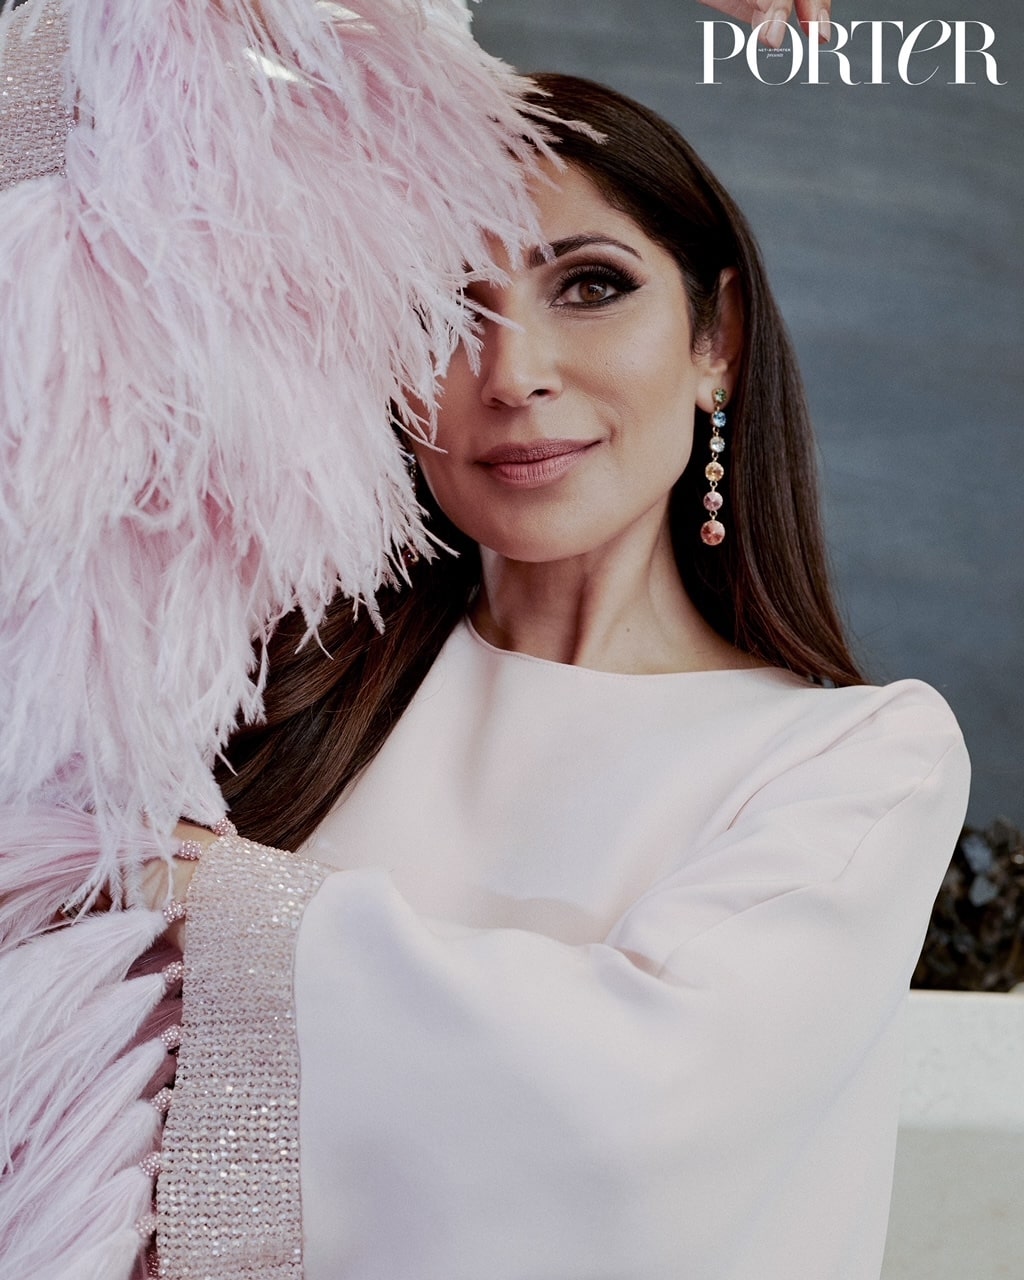 Sobia A. Shaikh is a massively influential figure in the world of fashion. Find out how she grew her career and became a worldwide sensation.